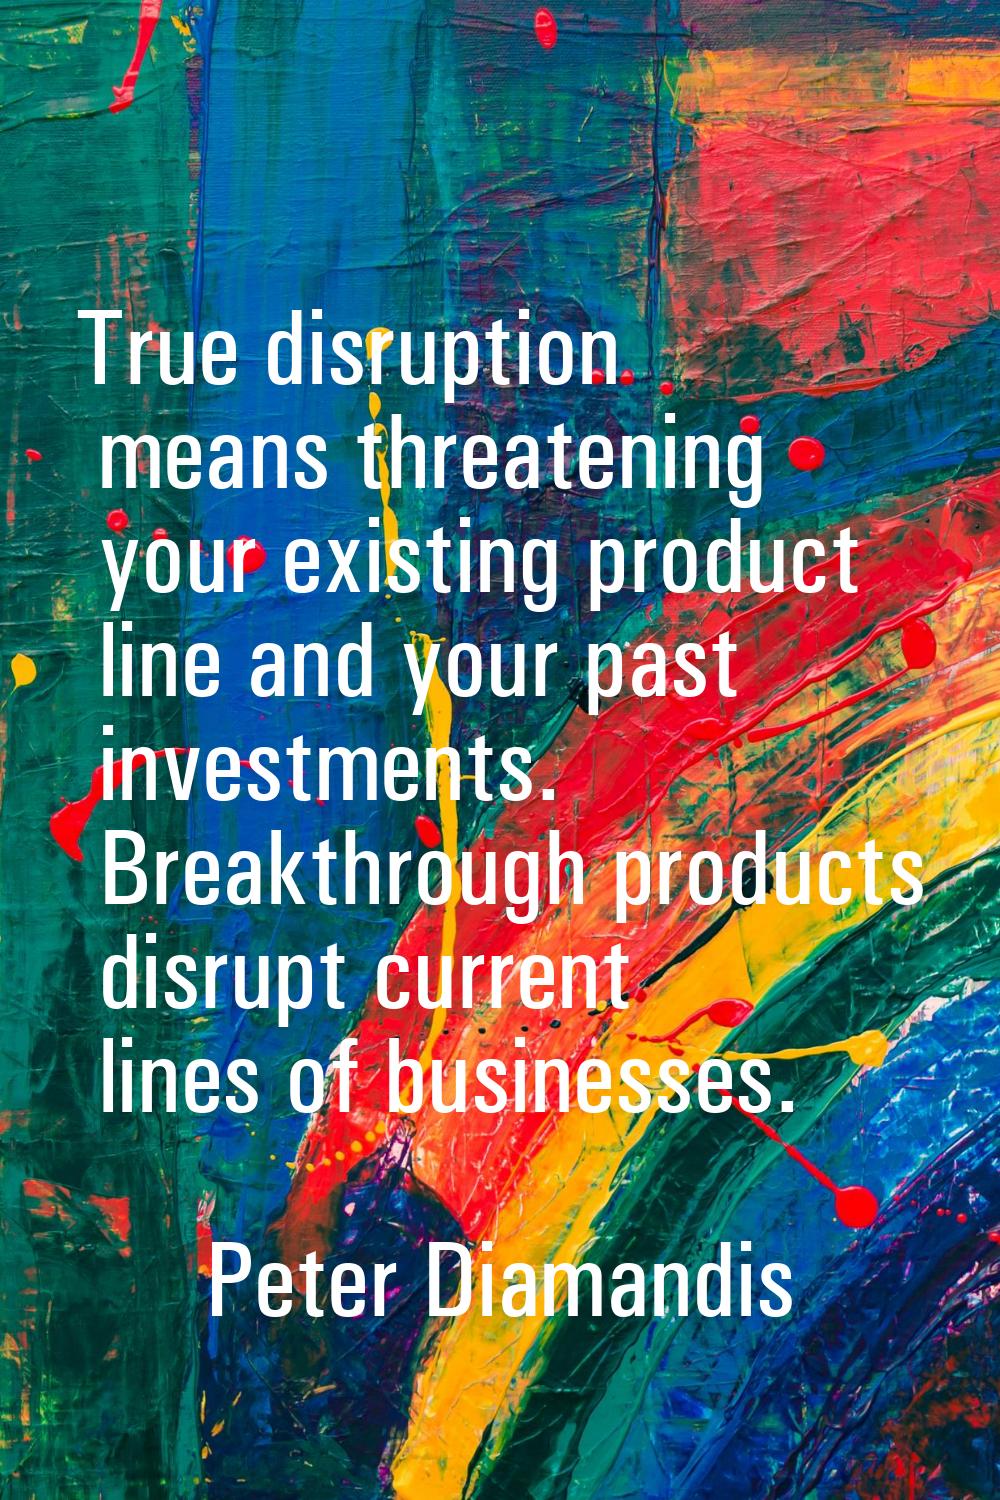 True disruption means threatening your existing product line and your past investments. Breakthroug